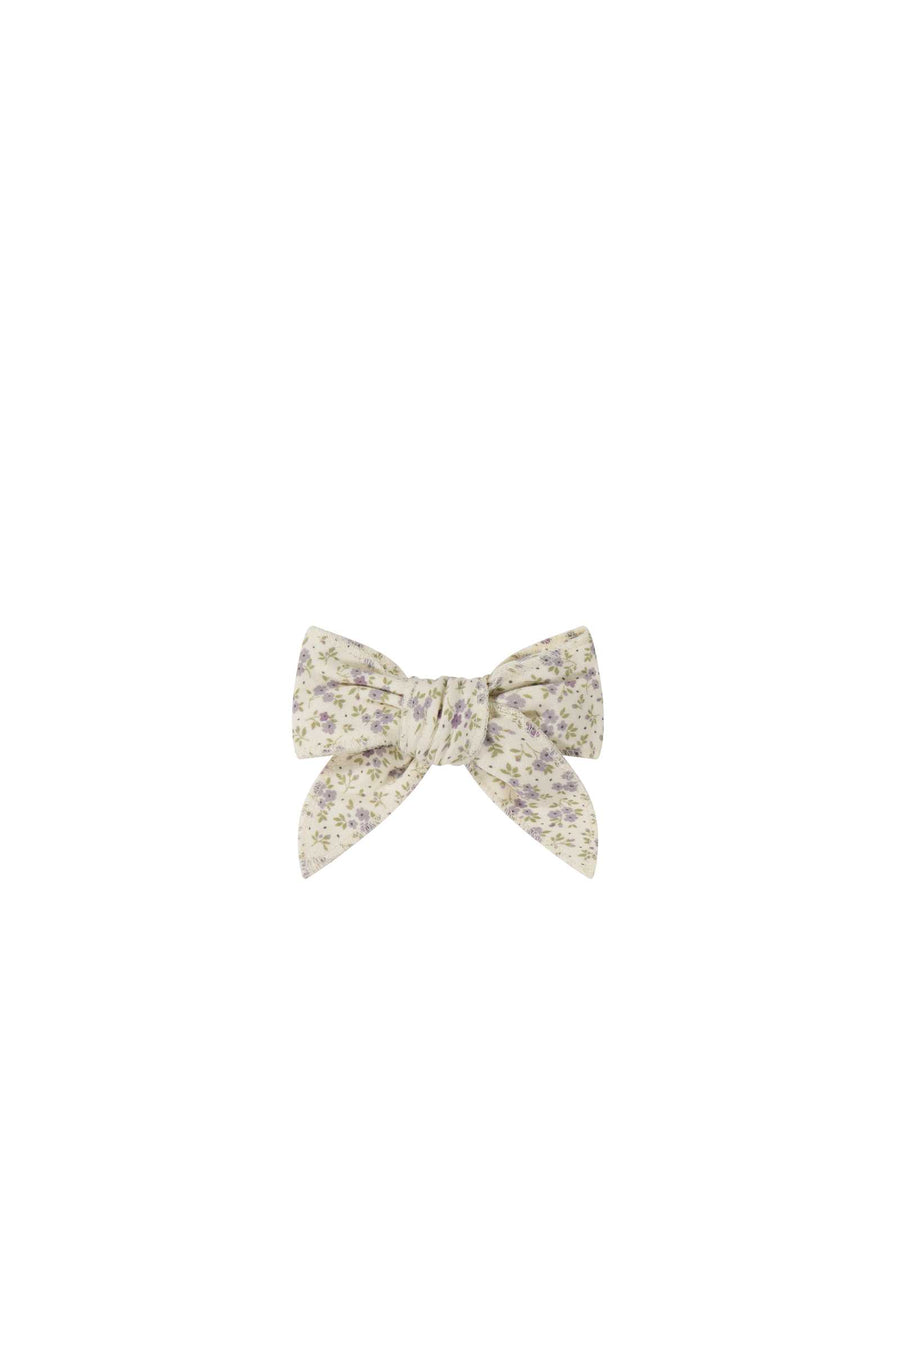 Organic Cotton Bow - Rosalie Fields Raindrops Childrens Bow from Jamie Kay NZ